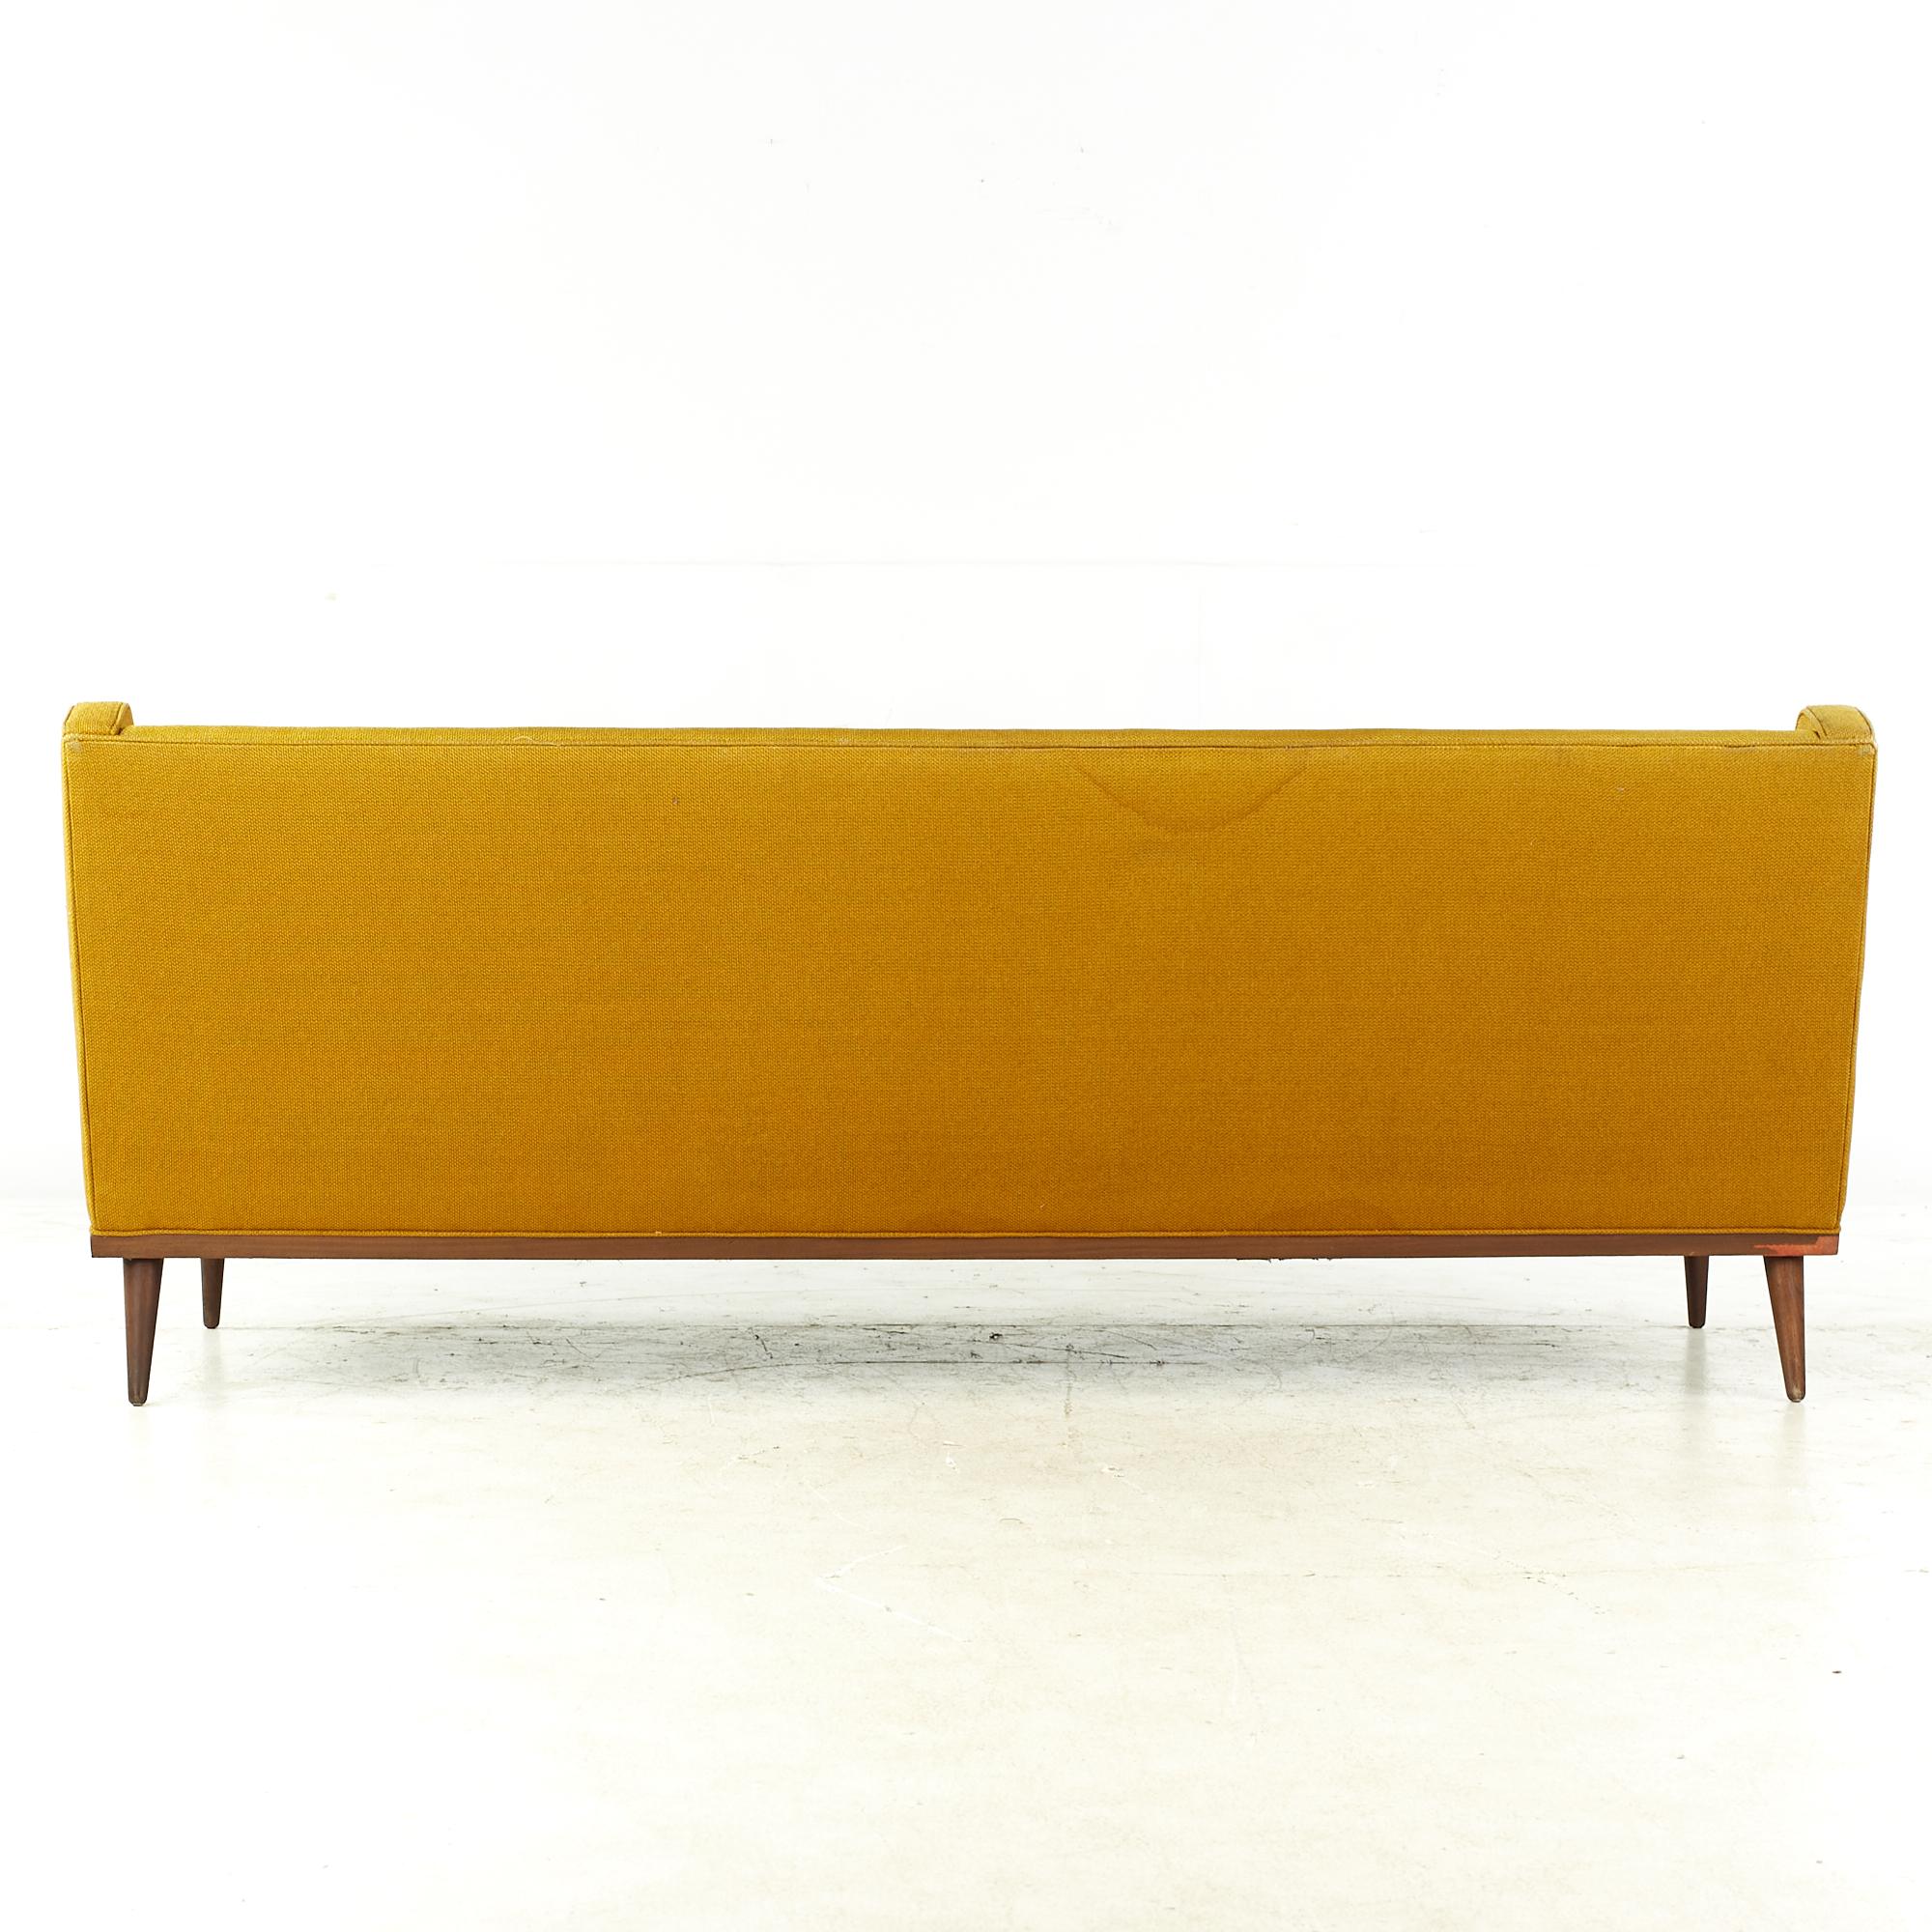 Milo Baughman for James Inc Mid Century Walnut Sofa In Good Condition For Sale In Countryside, IL